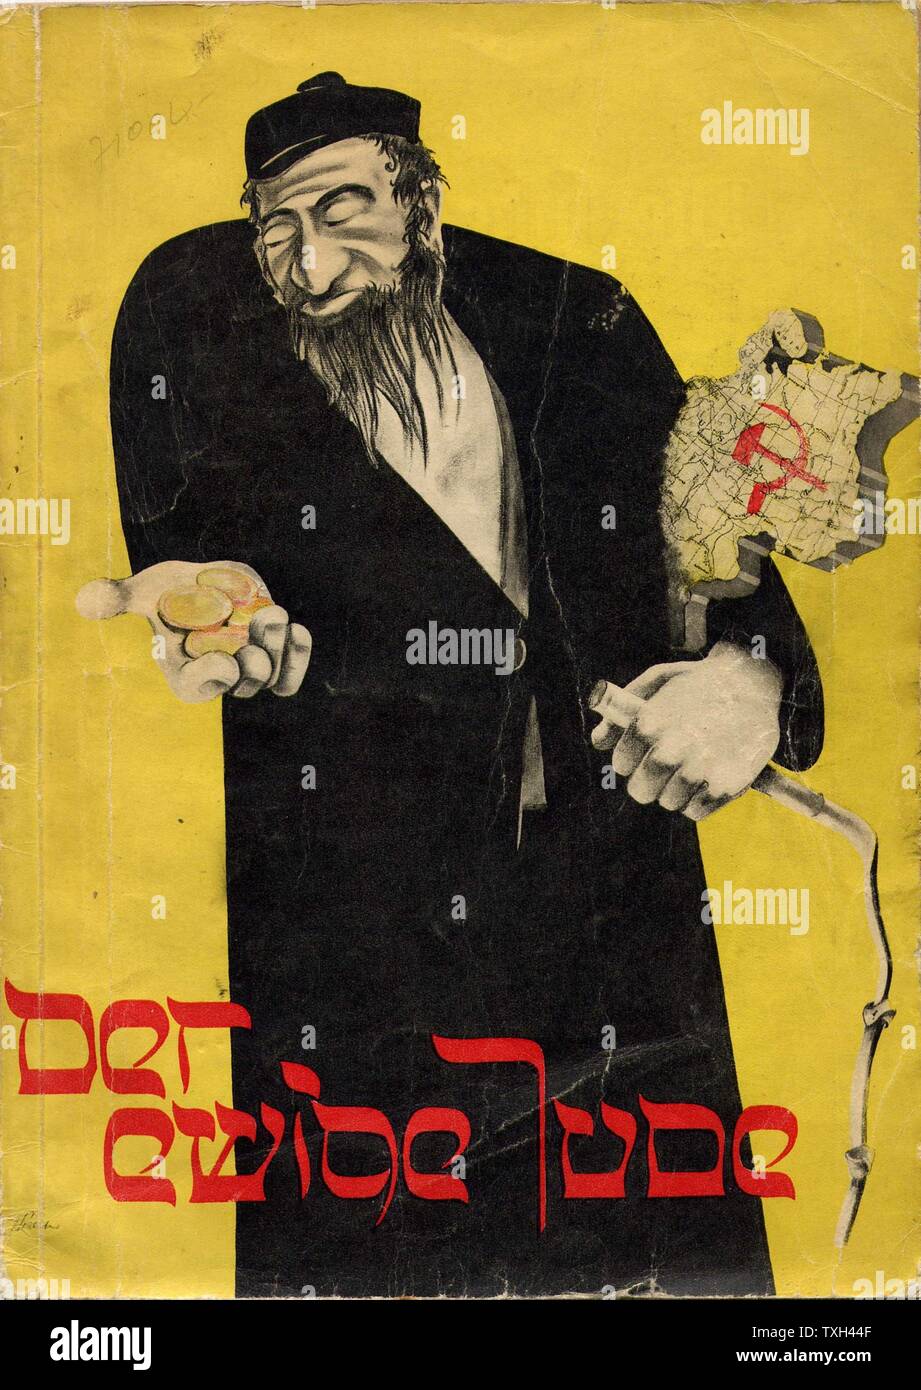 DER EWIGE JUDE, 1937, book of photographs published by the Third Reich. Dramatic Antisemitic illustration showing a Jew holding gold coins in one hand and a whip in the other, with the Soviet Union under his arm. Der ewige Jude ('The Eternal Jew'), 1940, was the most infamous Nazi propaganda film. It was produced at the insistence of Joseph Goebbels and depicts the Jews of Poland as corrupt, filthy, lazy, ugly, and perverse. Stock Photo